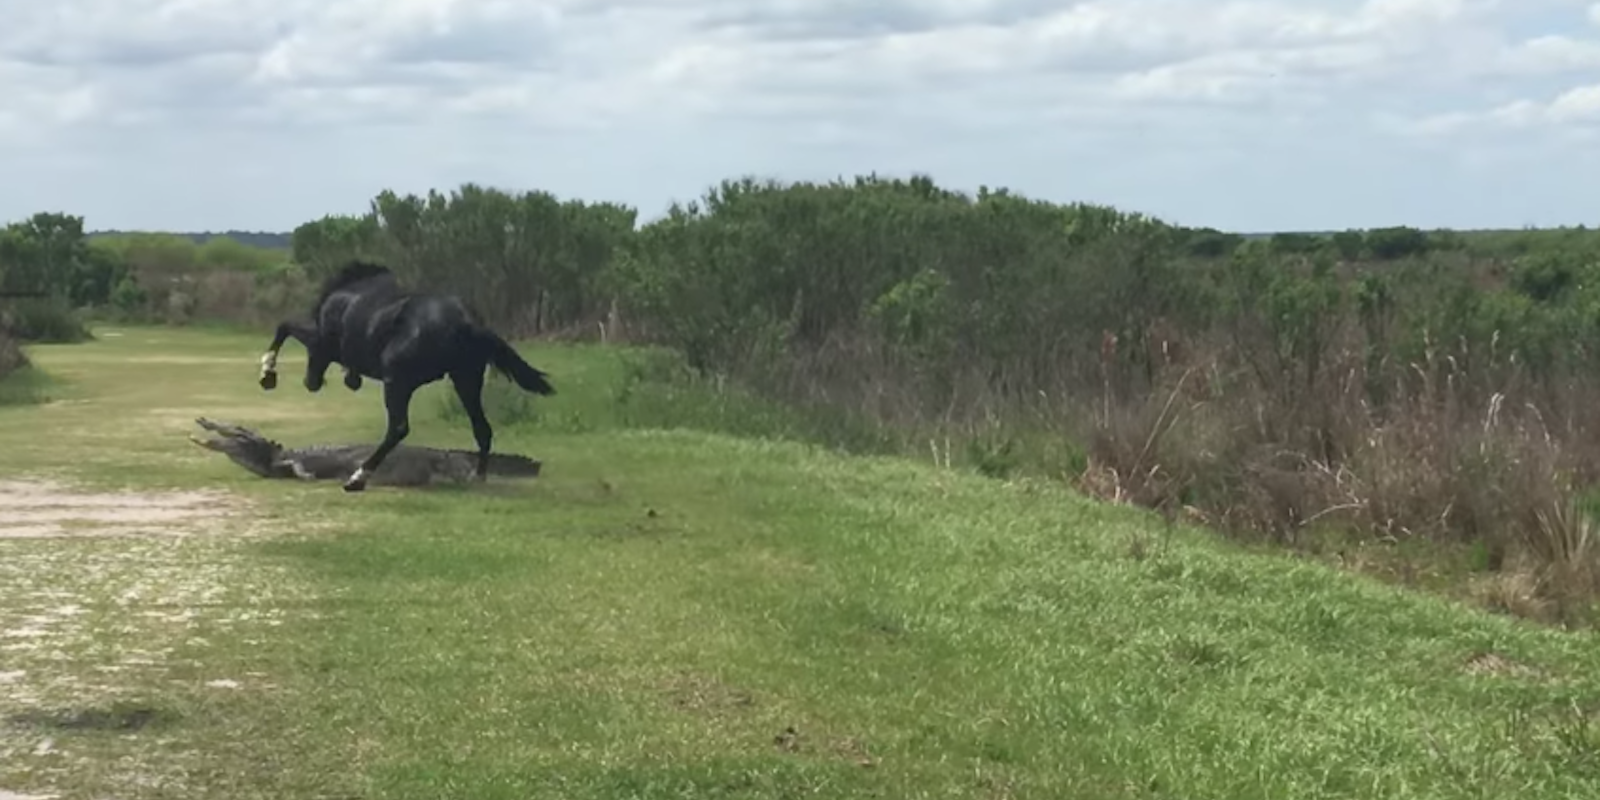 horse fights alligator: video shows horse stomping an aliigator